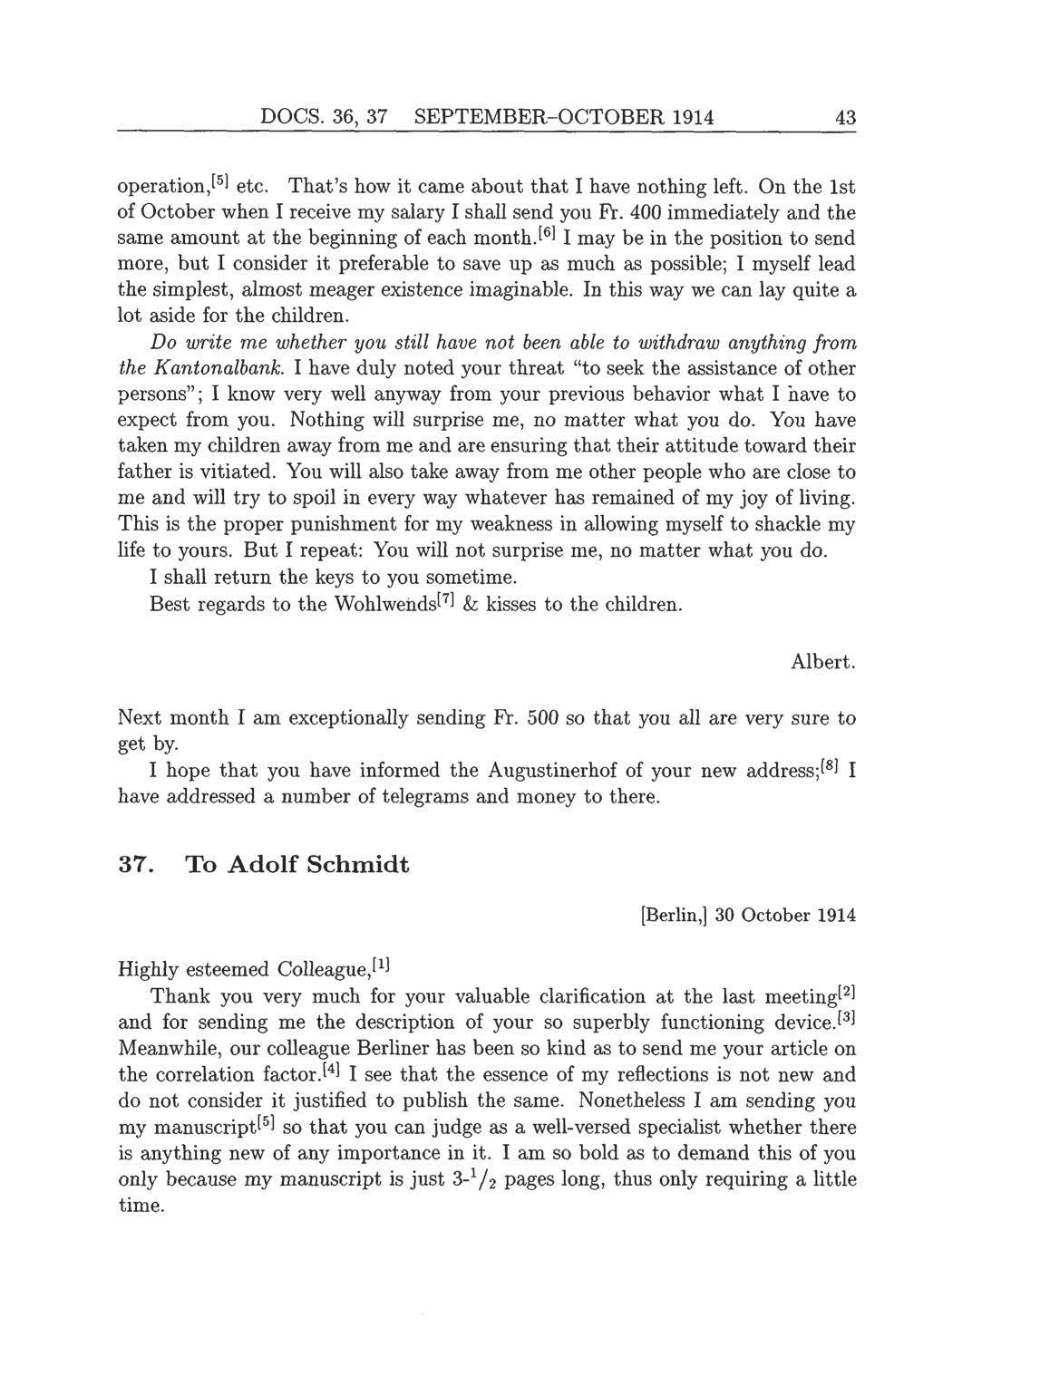 Volume 8: The Berlin Years: Correspondence, 1914-1918 (English translation supplement) page 43